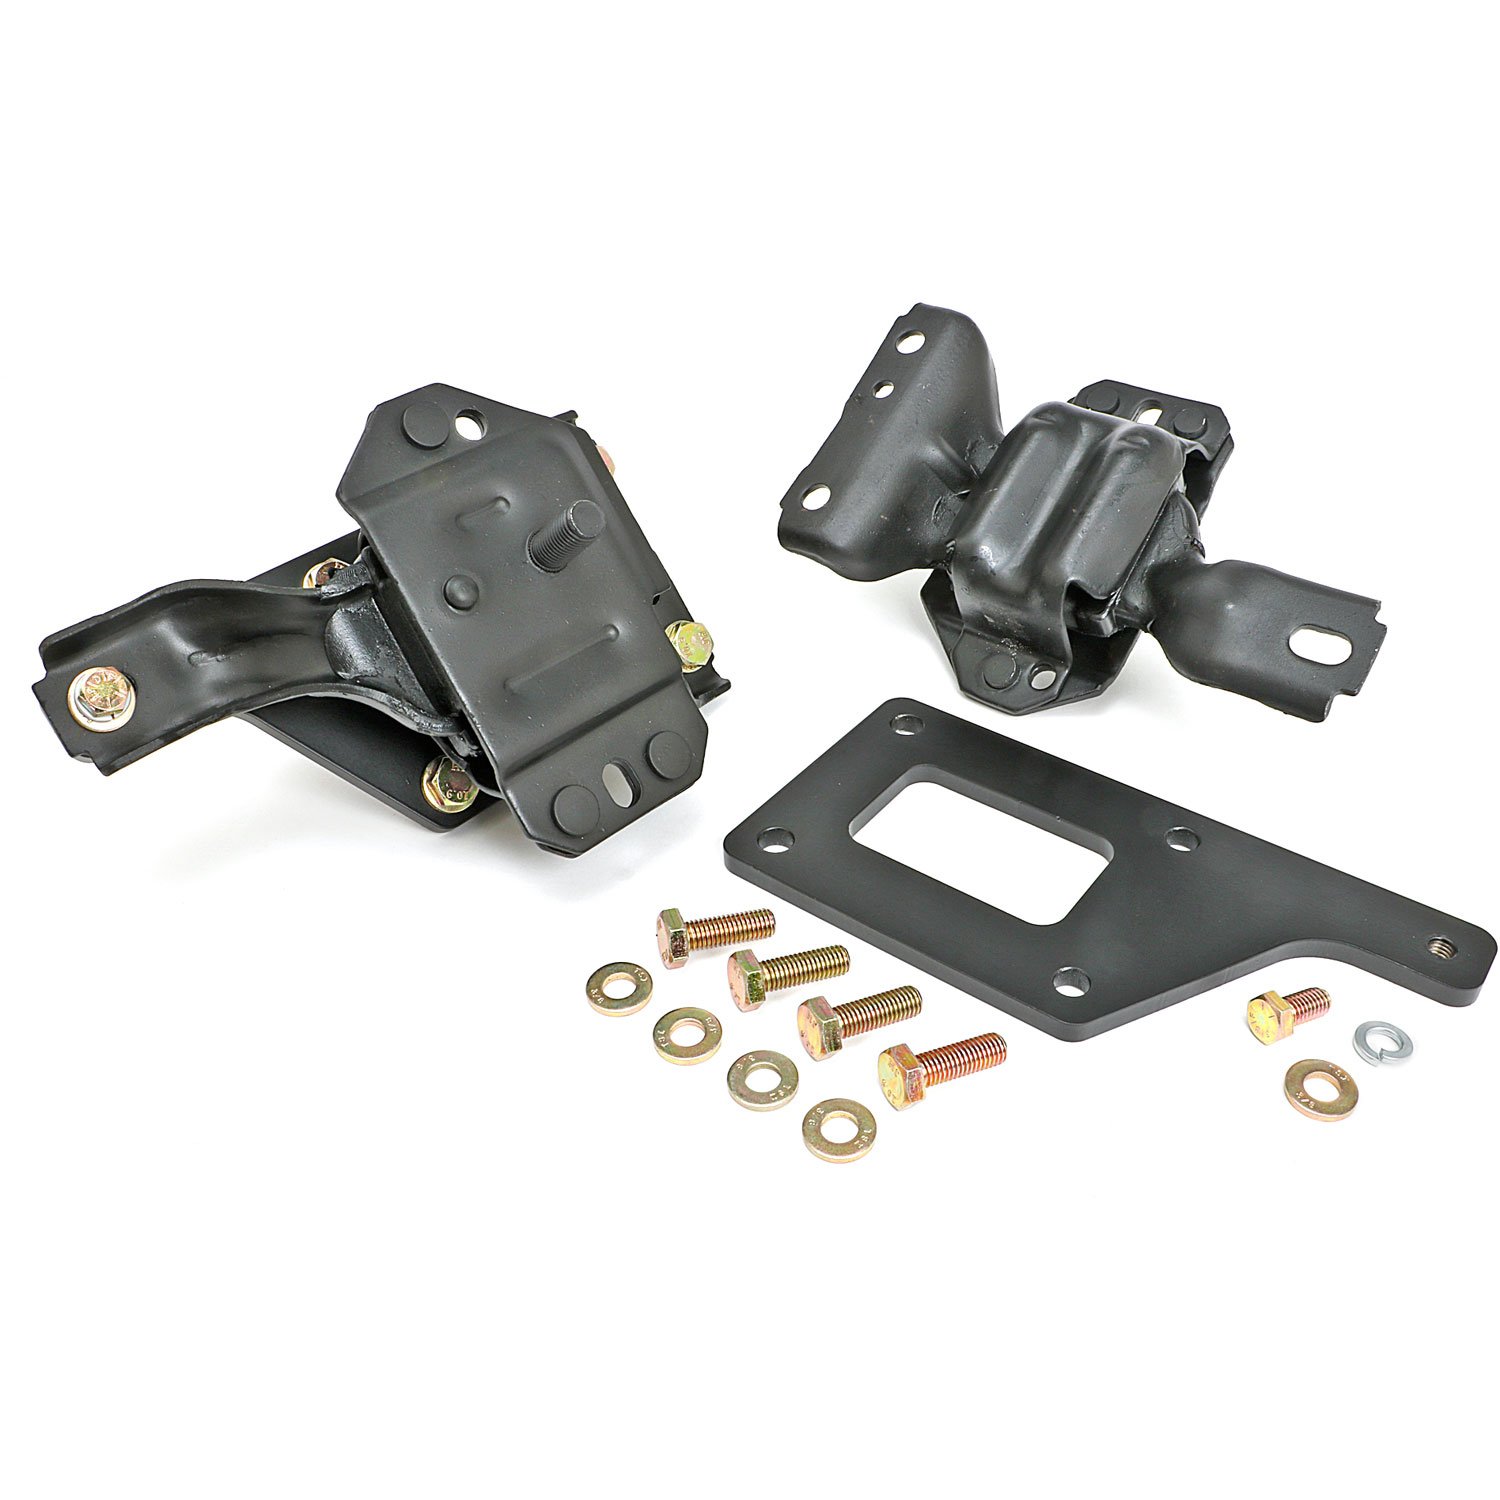 Engine Swap Kit GM LS into 1996-2004 Mustang 4.6L